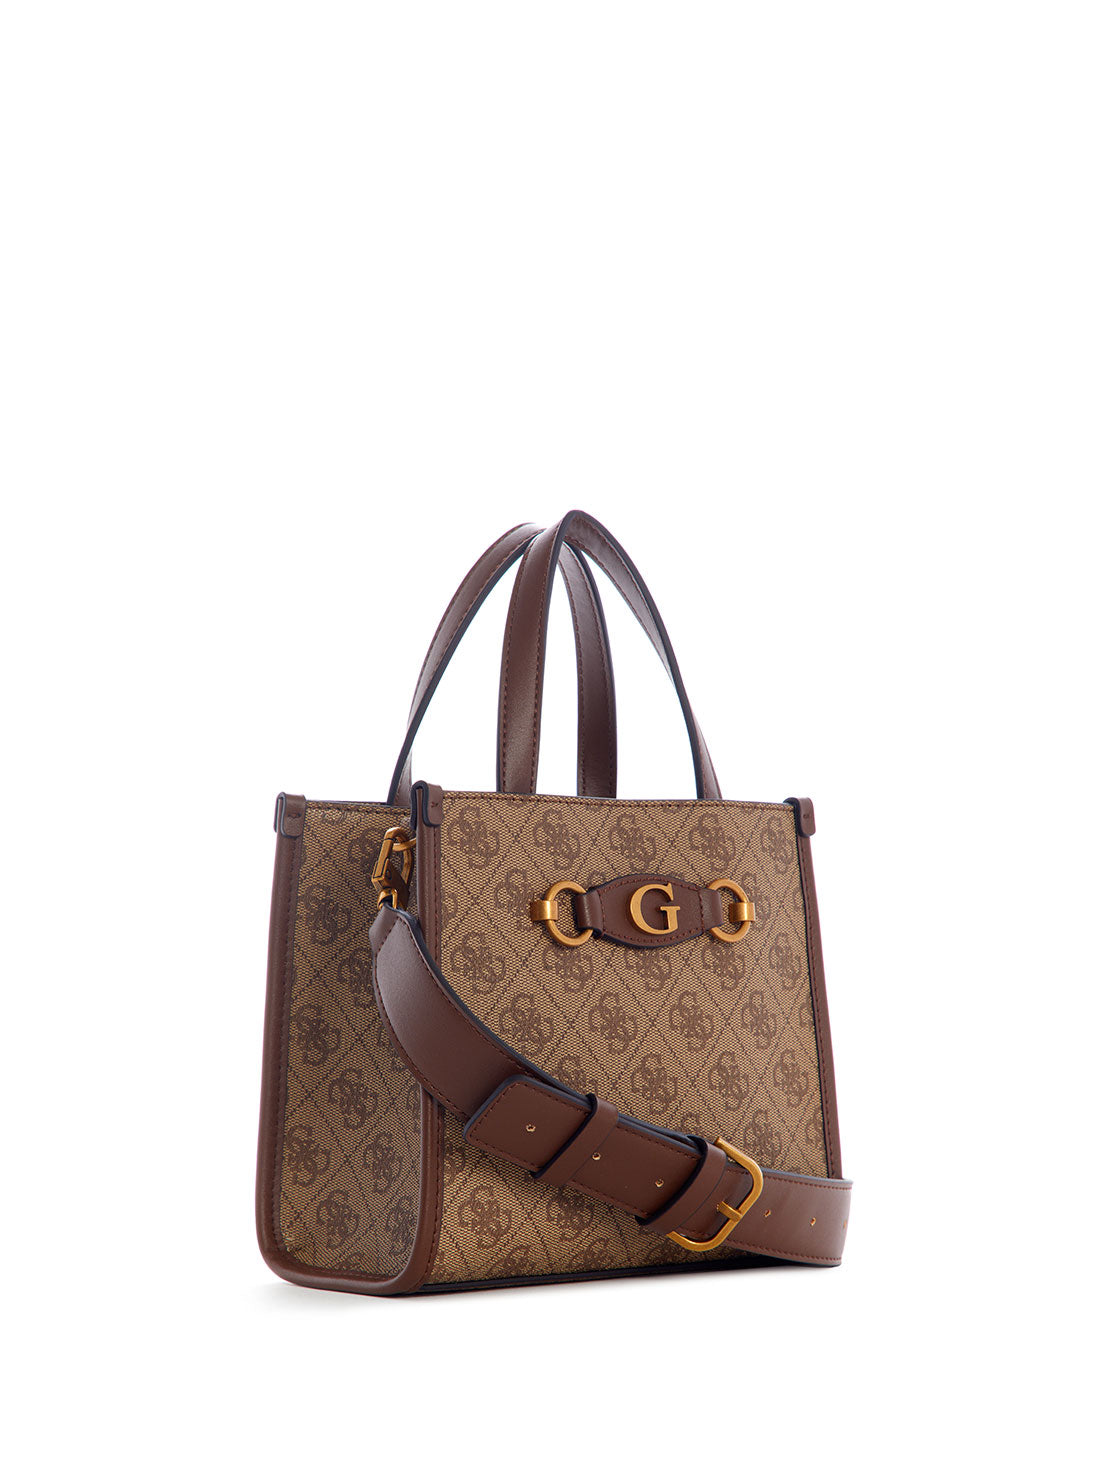 GUESS Women's Brown Logo Izzy Mini Tote Bag SB865476 Front Side View